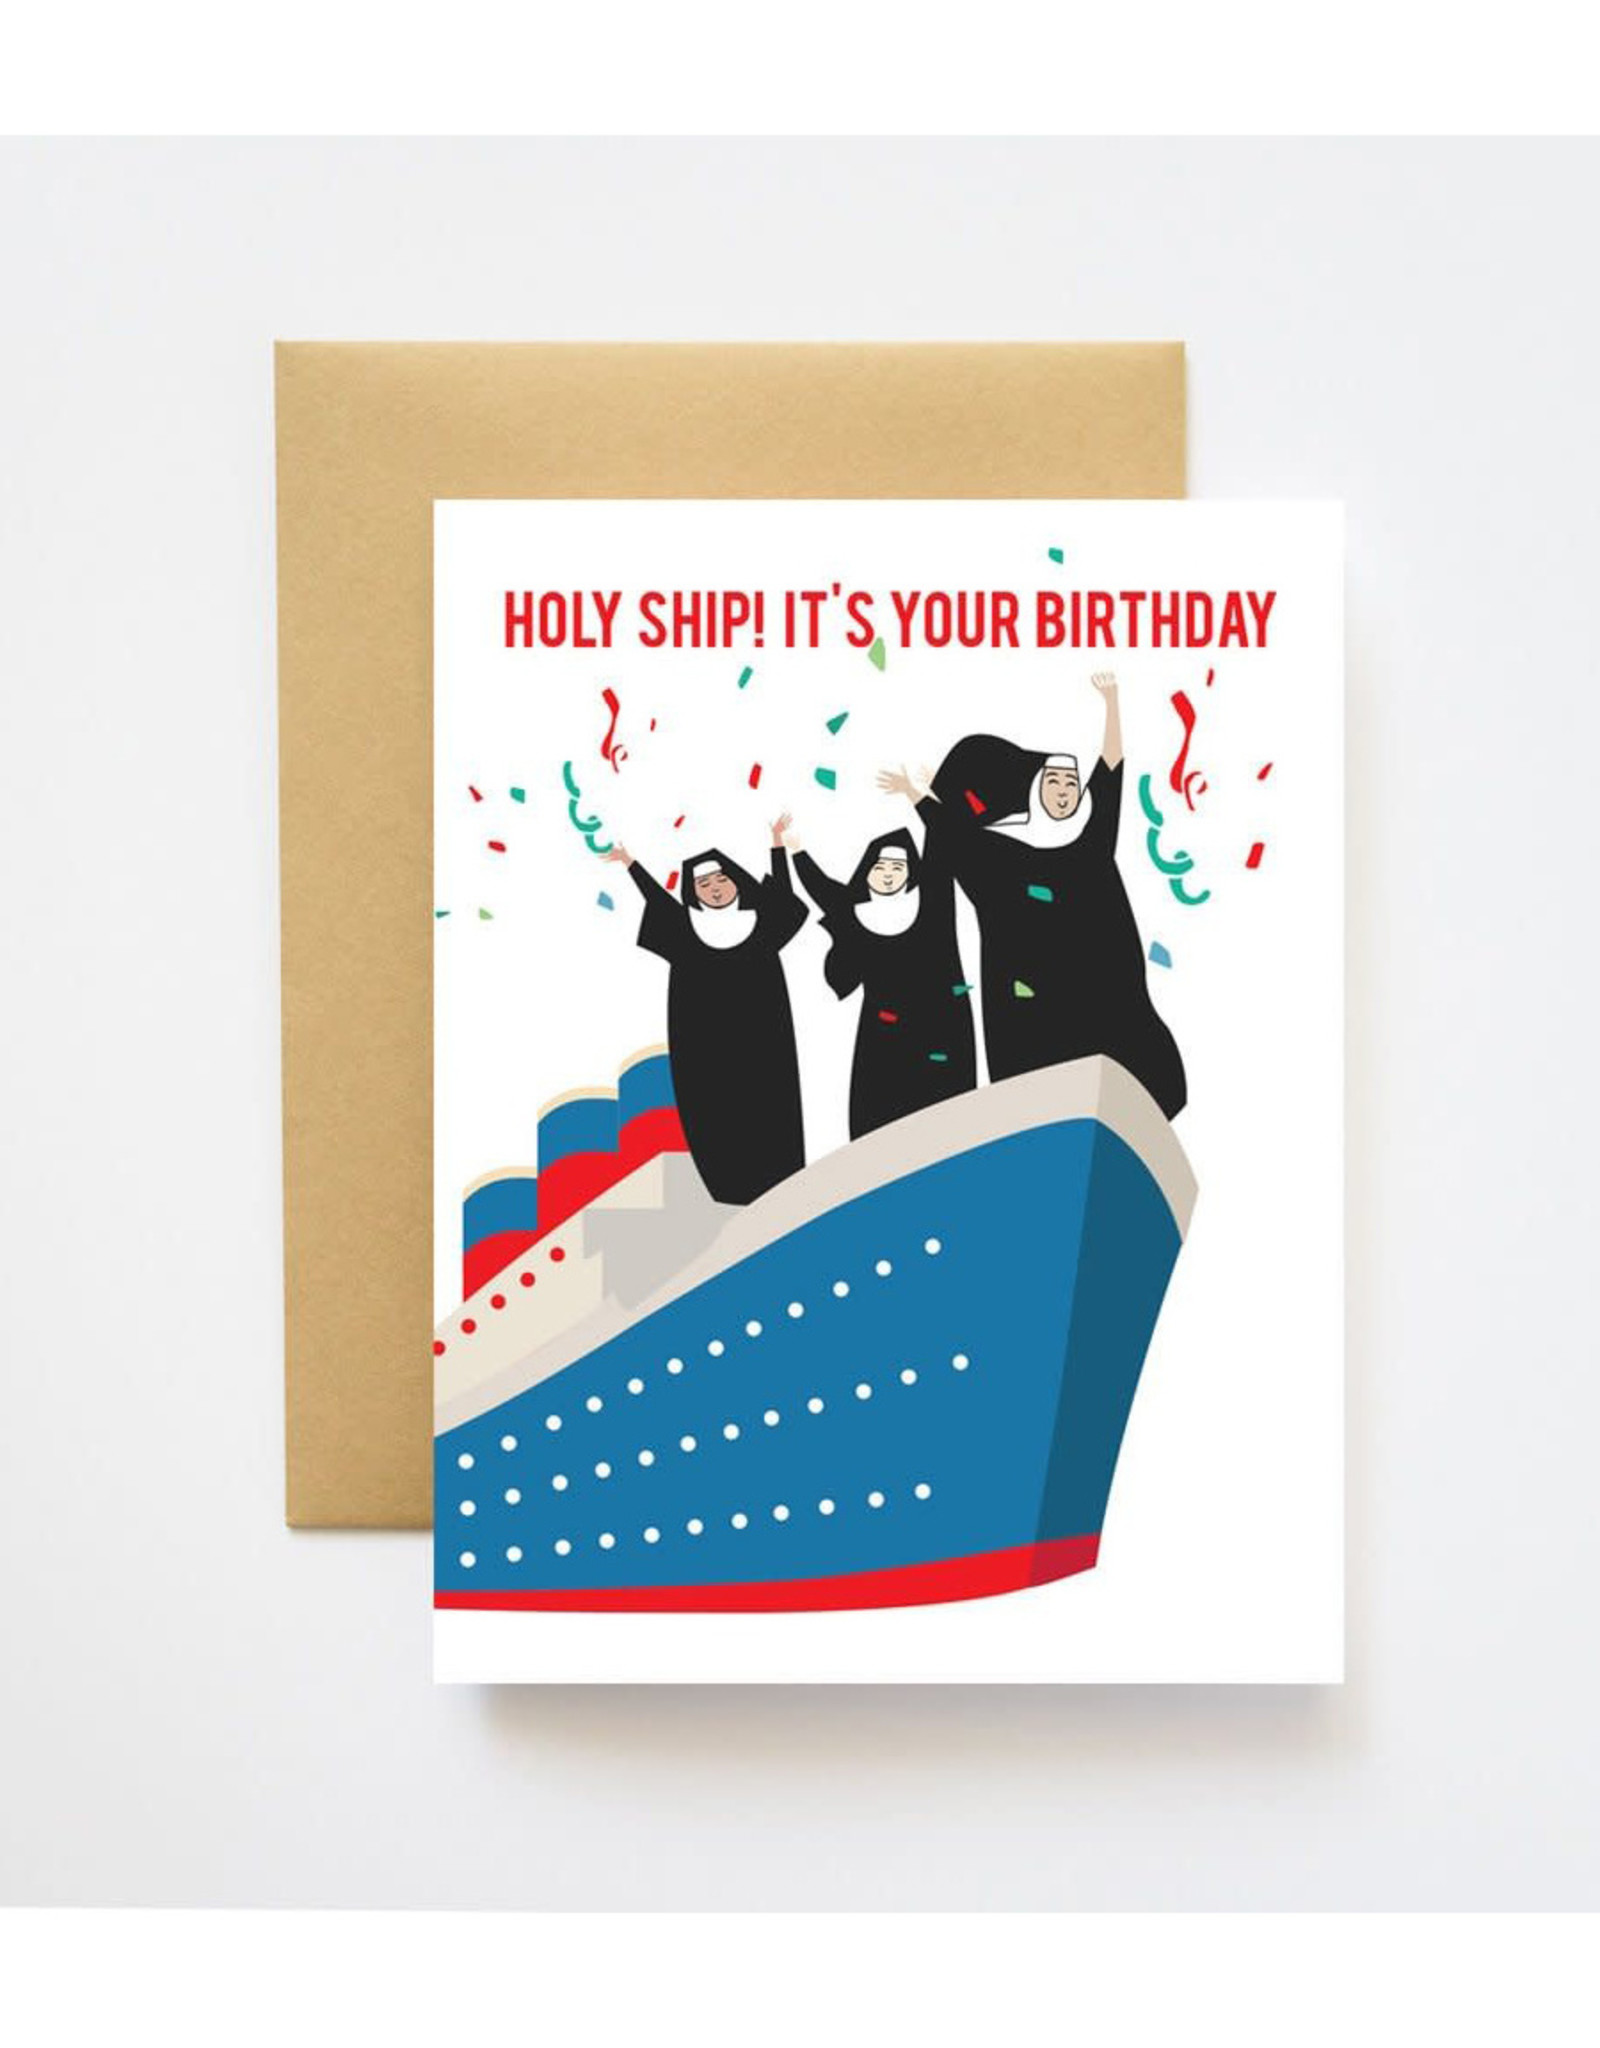 Holy Ship! It's Your Birthday! Greeting Card